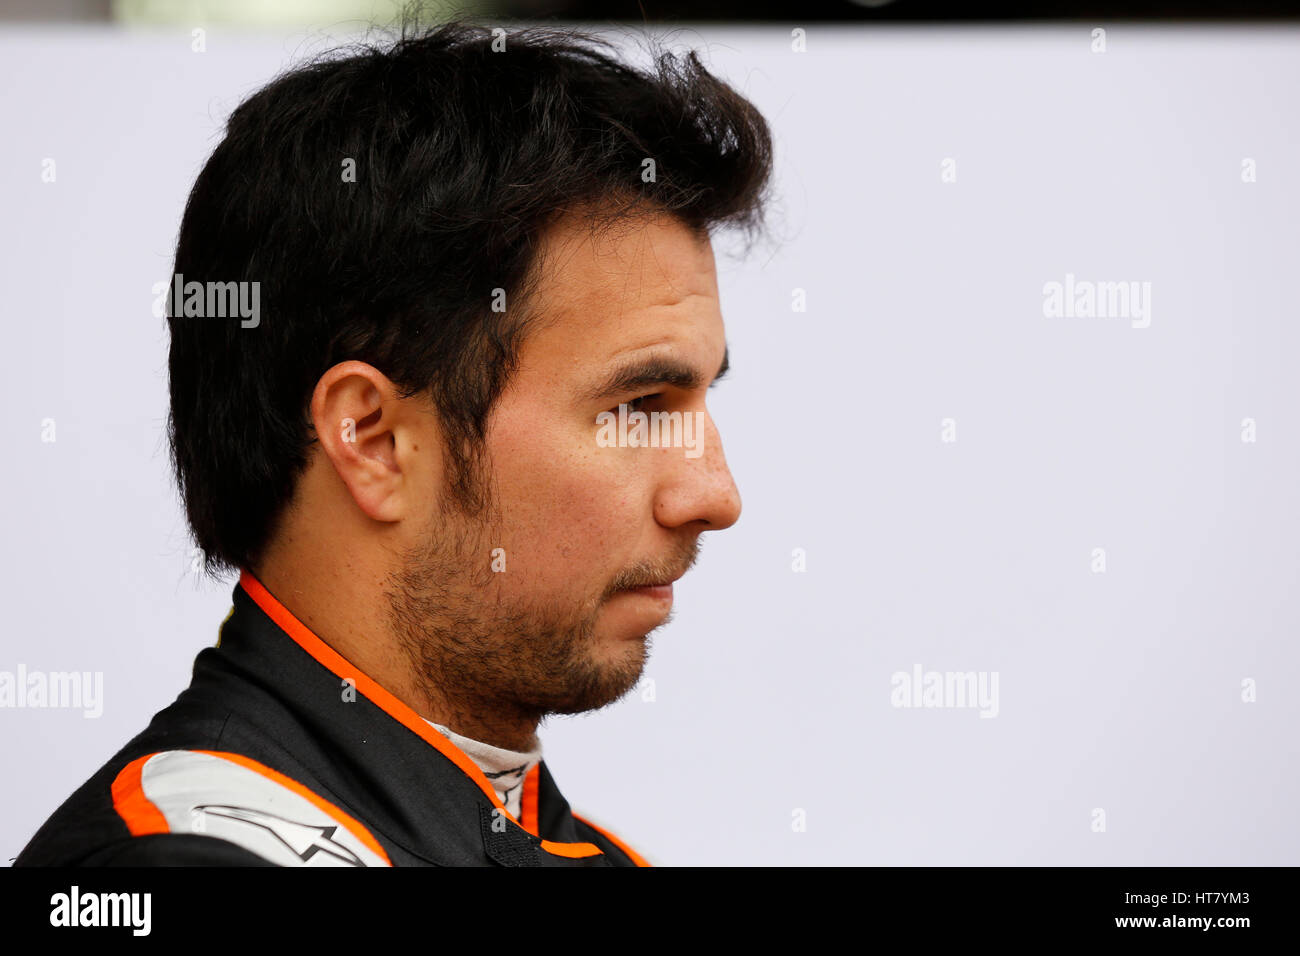 Barcelona, Spain. 8th March 2017. Sergio Perez during the FORMULA ONE TEST  DAYS seasson 2, day 2 in Montmeló, Spain Credit: Cronos Foto/Alamy Live  News Stock Photo - Alamy